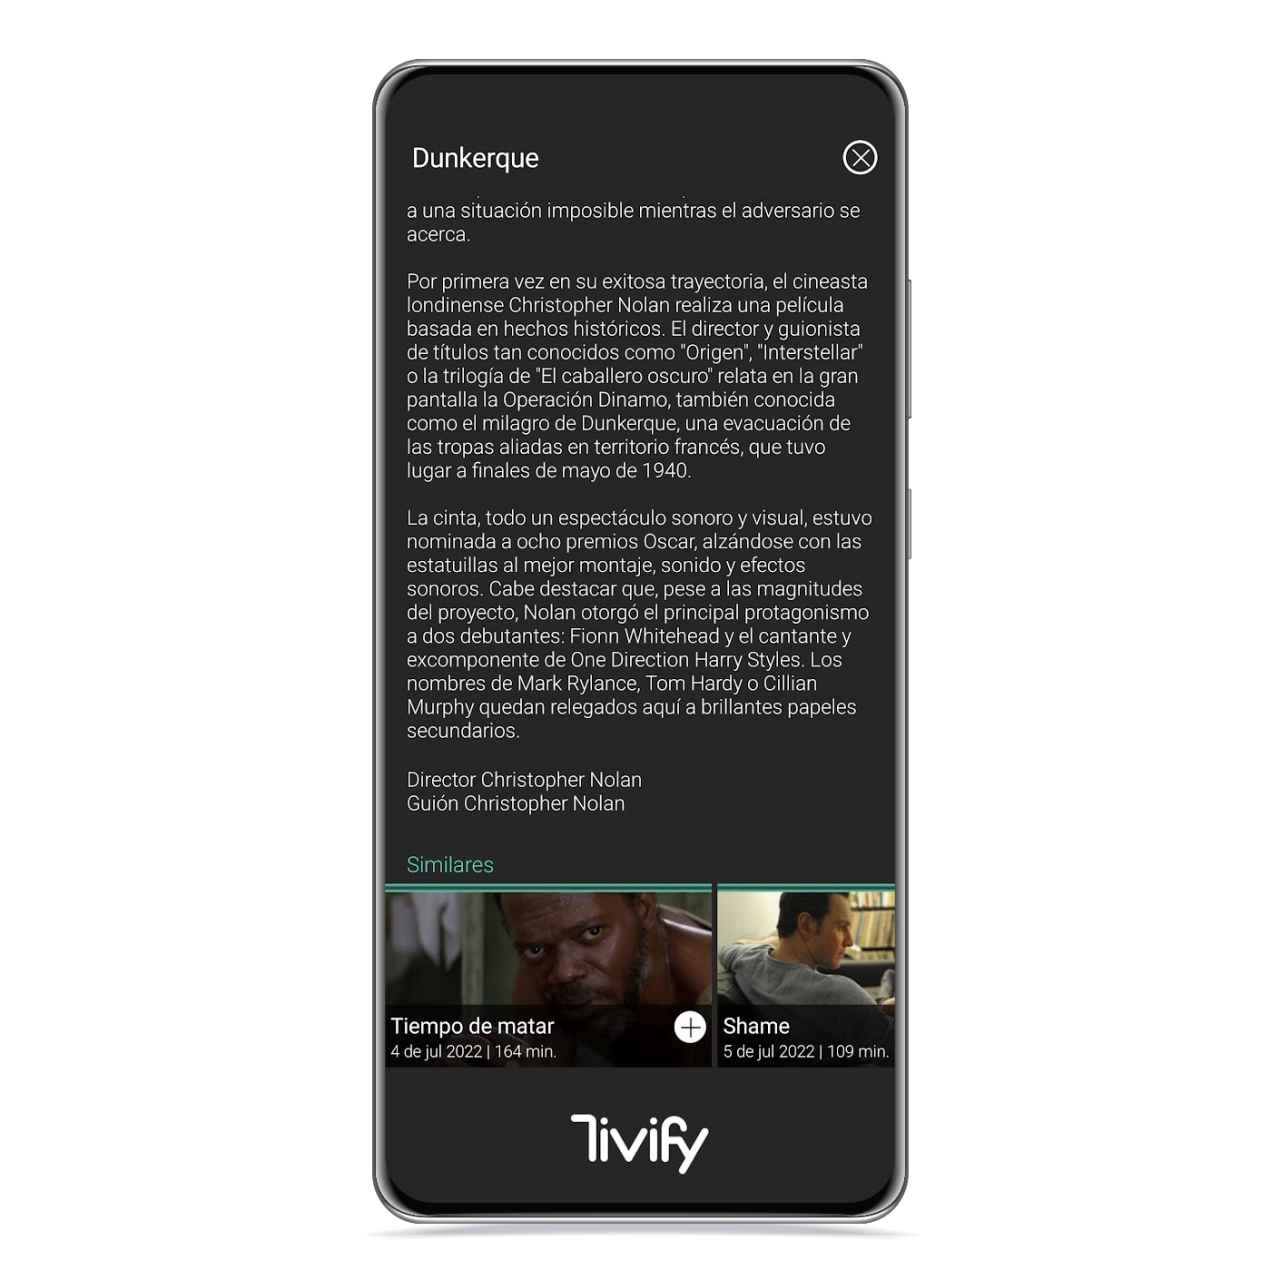 Related content on Tivify